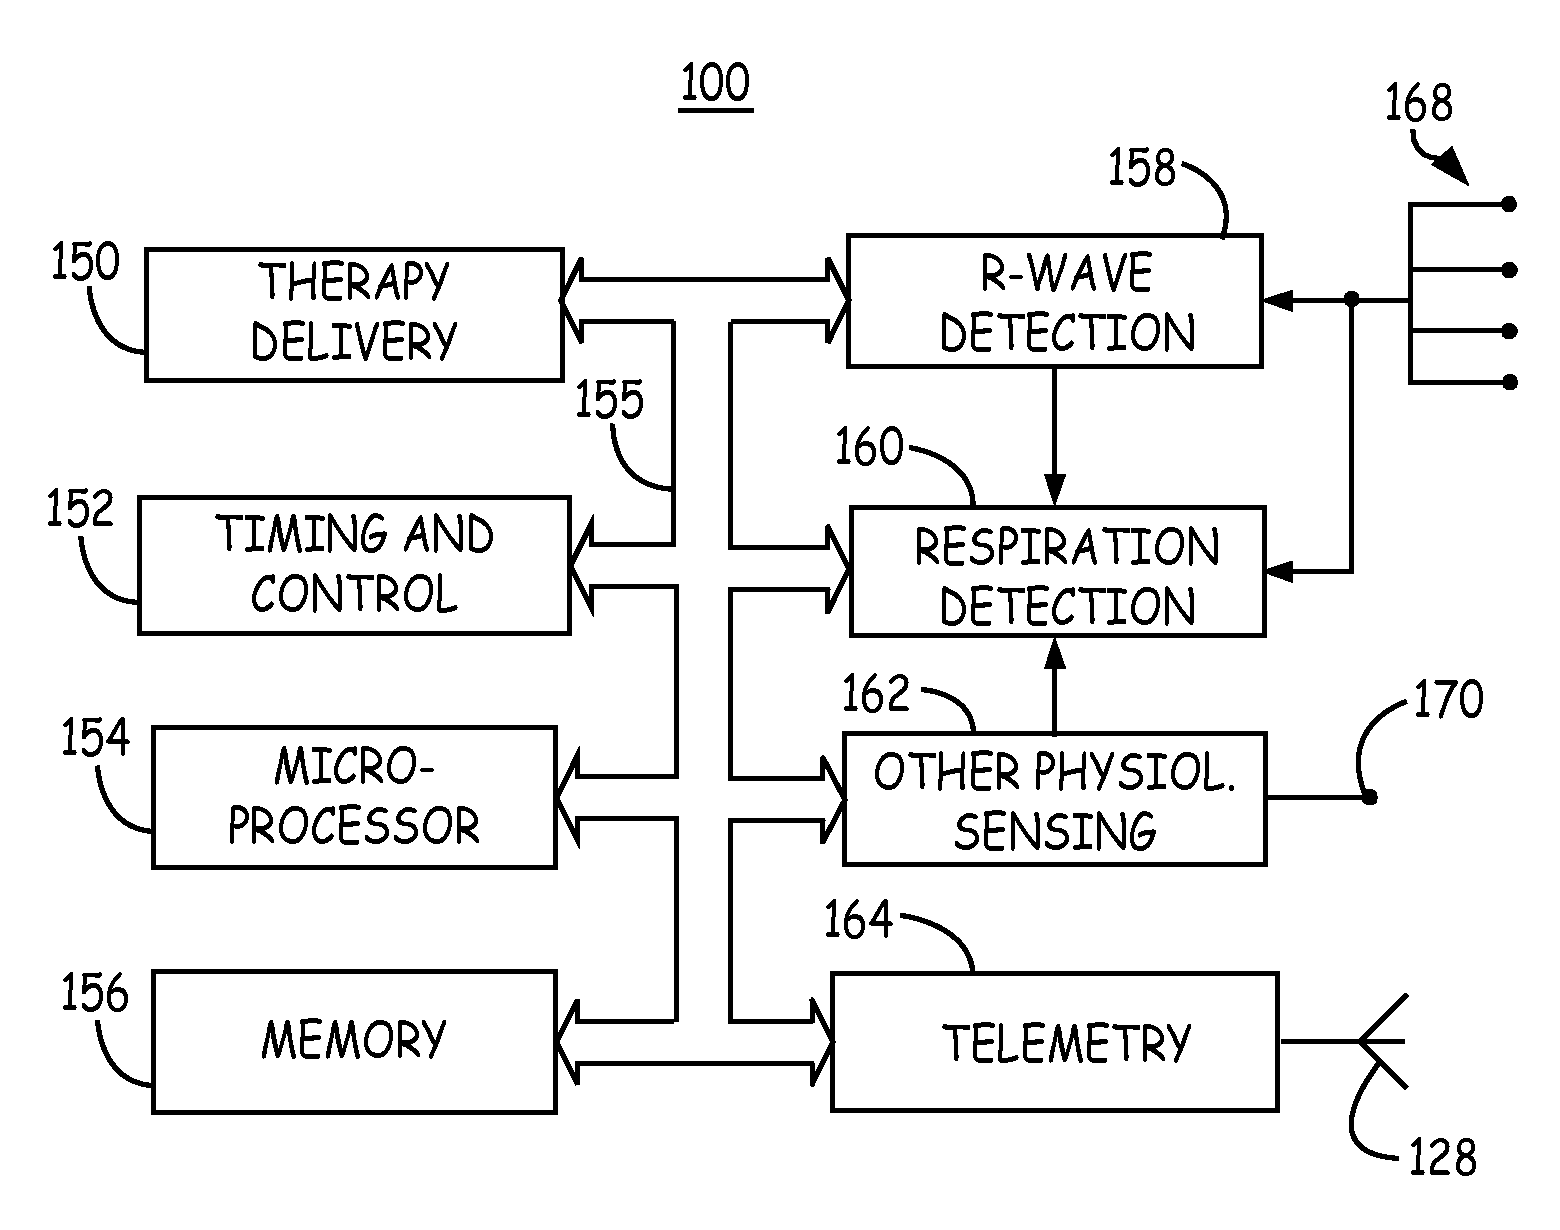 System and method for deriving respiration from intracardiac electrograms (EGM) or ECG signals